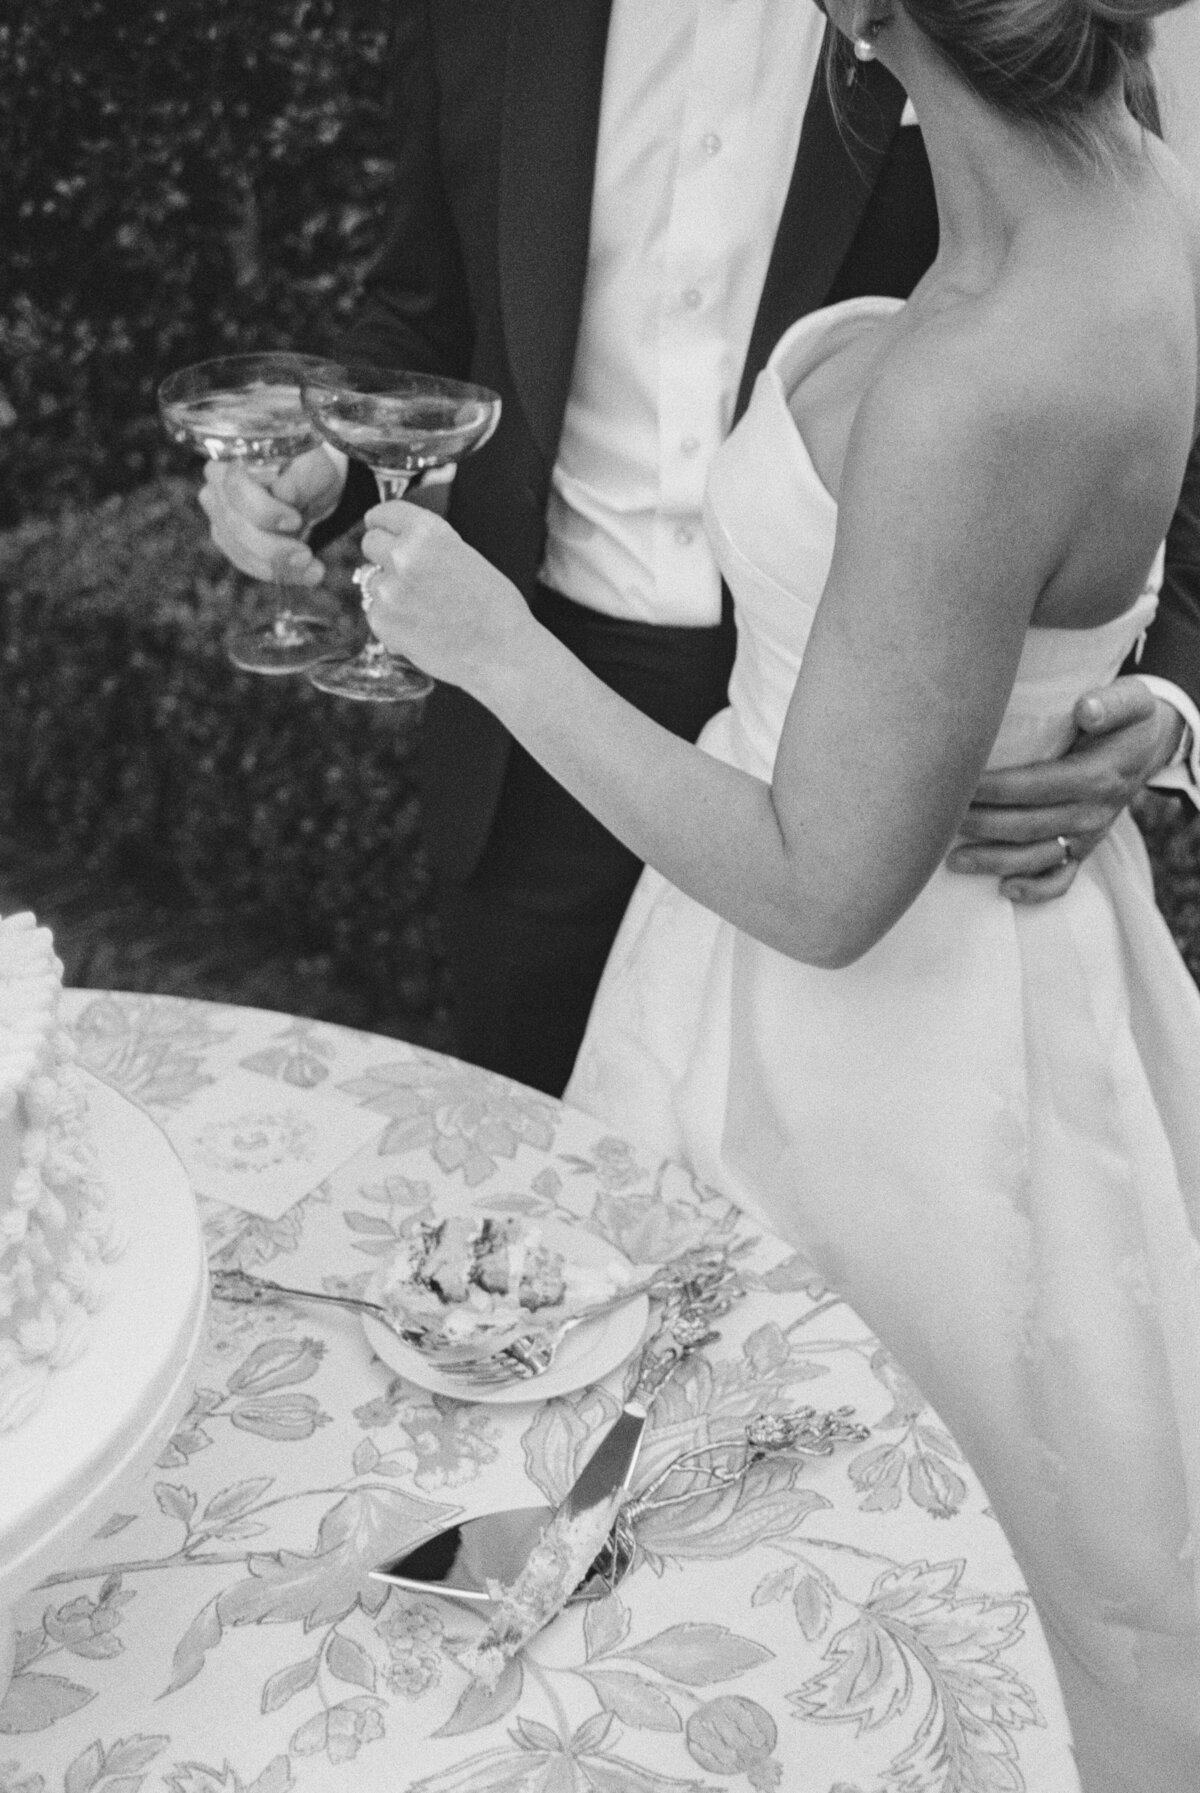 Bride and groom champagne toast after cutting wedding cake.